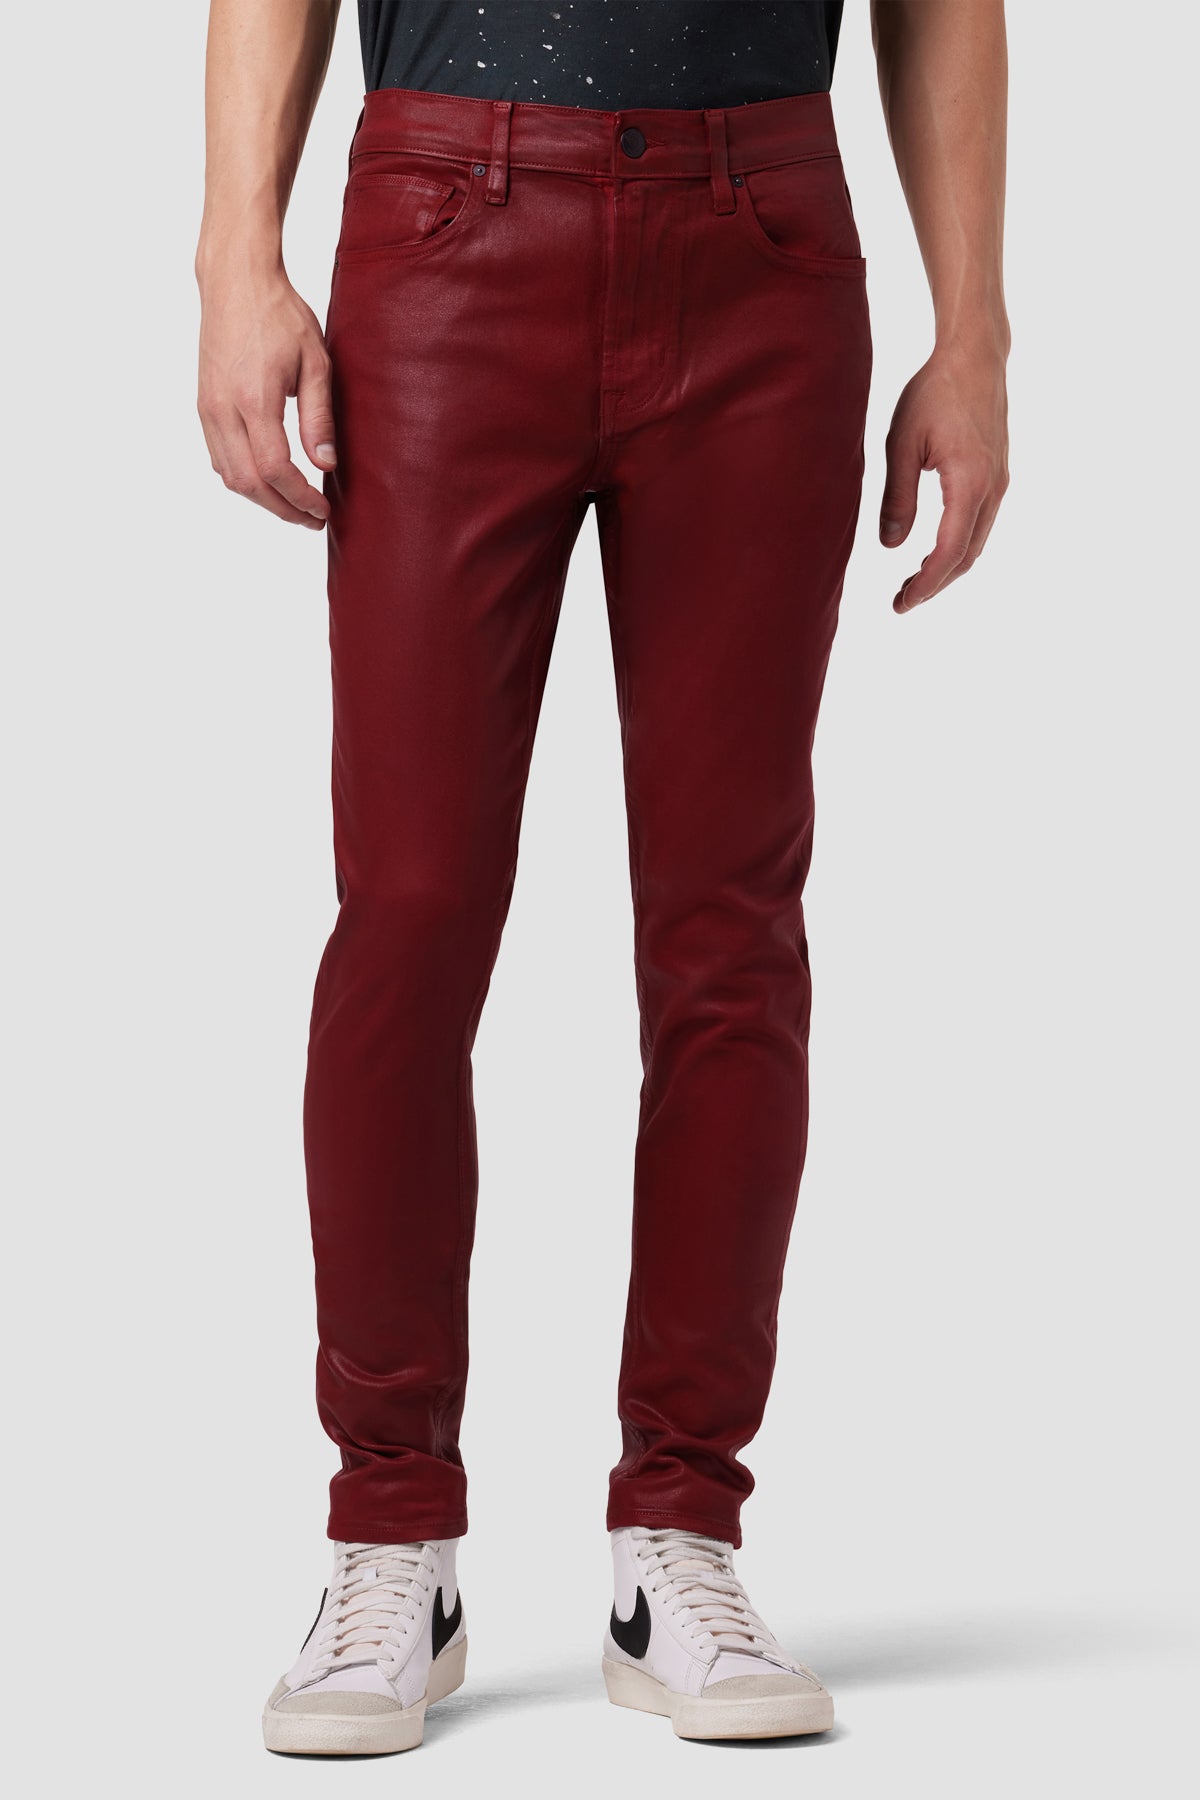 Men's Red Skinny Fit Jeans